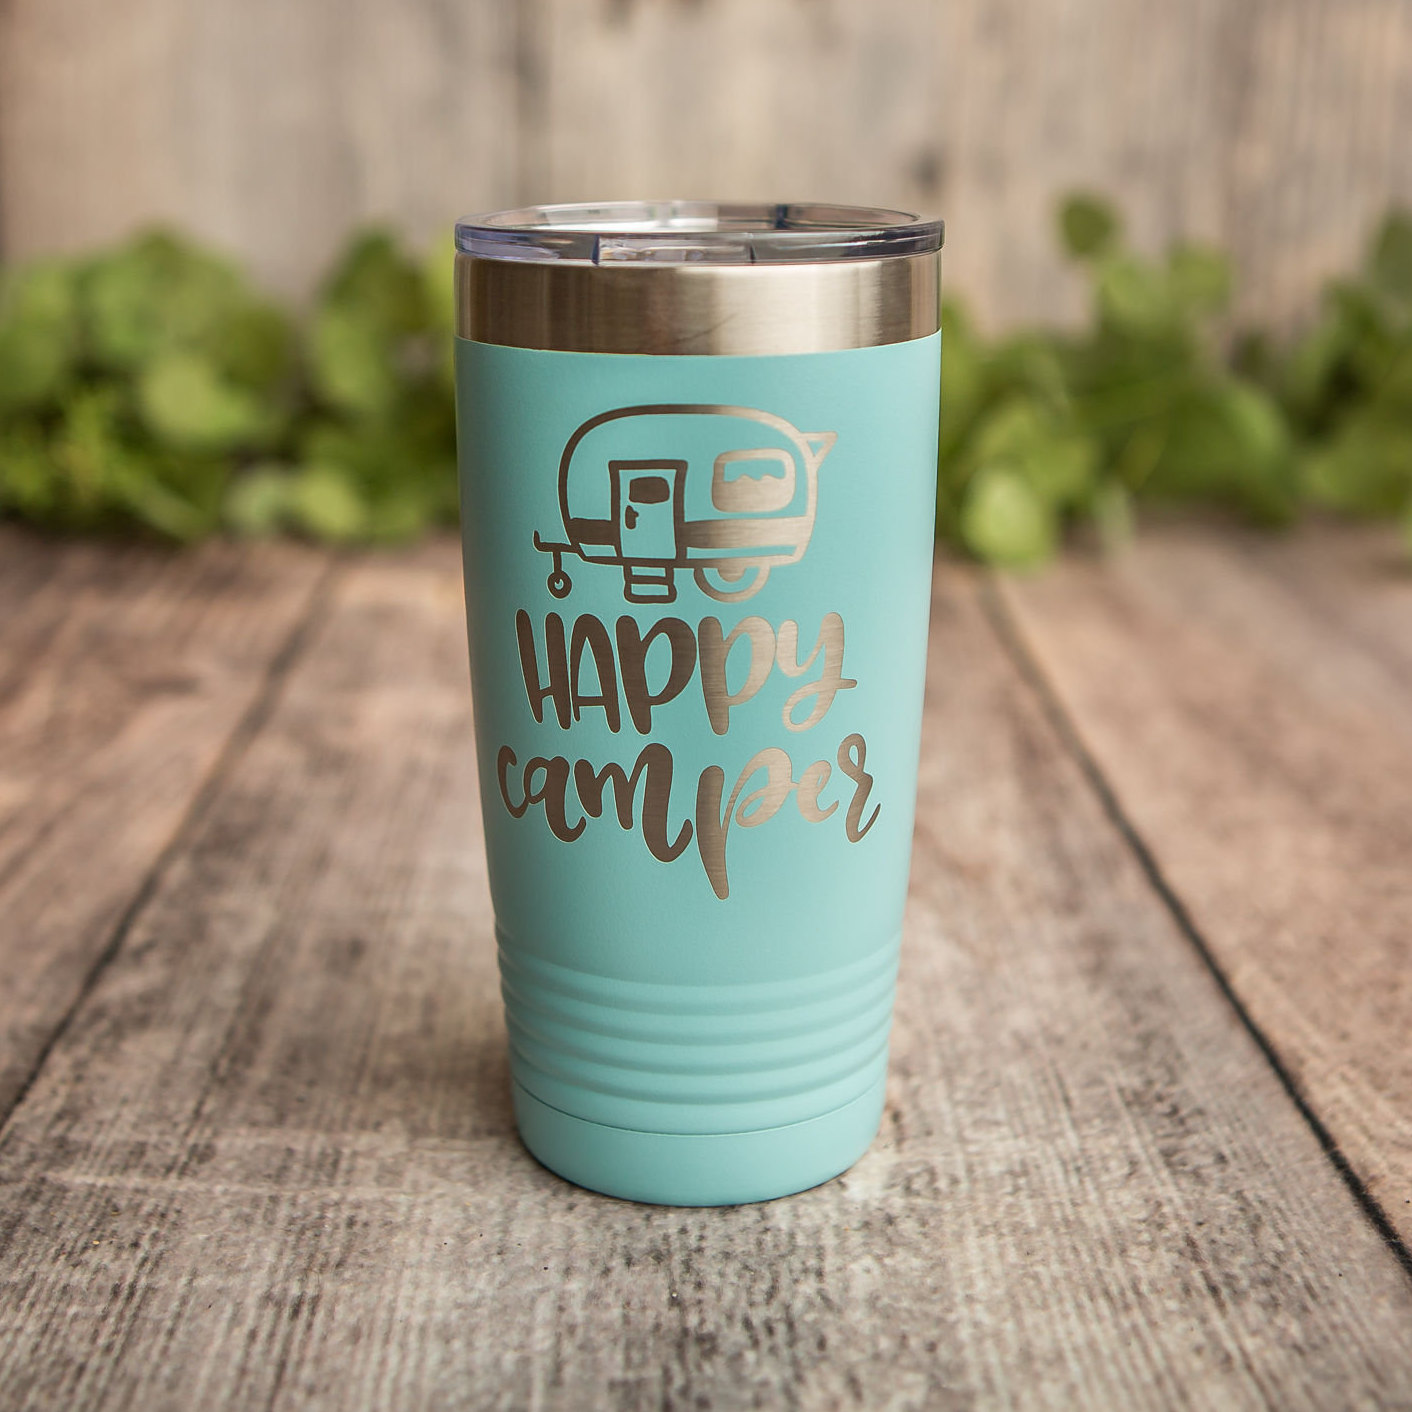 https://3cetching.com/wp-content/uploads/2020/09/happy-camper-engraved-stainless-steel-tumbler-yeti-style-cup-happy-camper-cup-5f60bb18.jpg